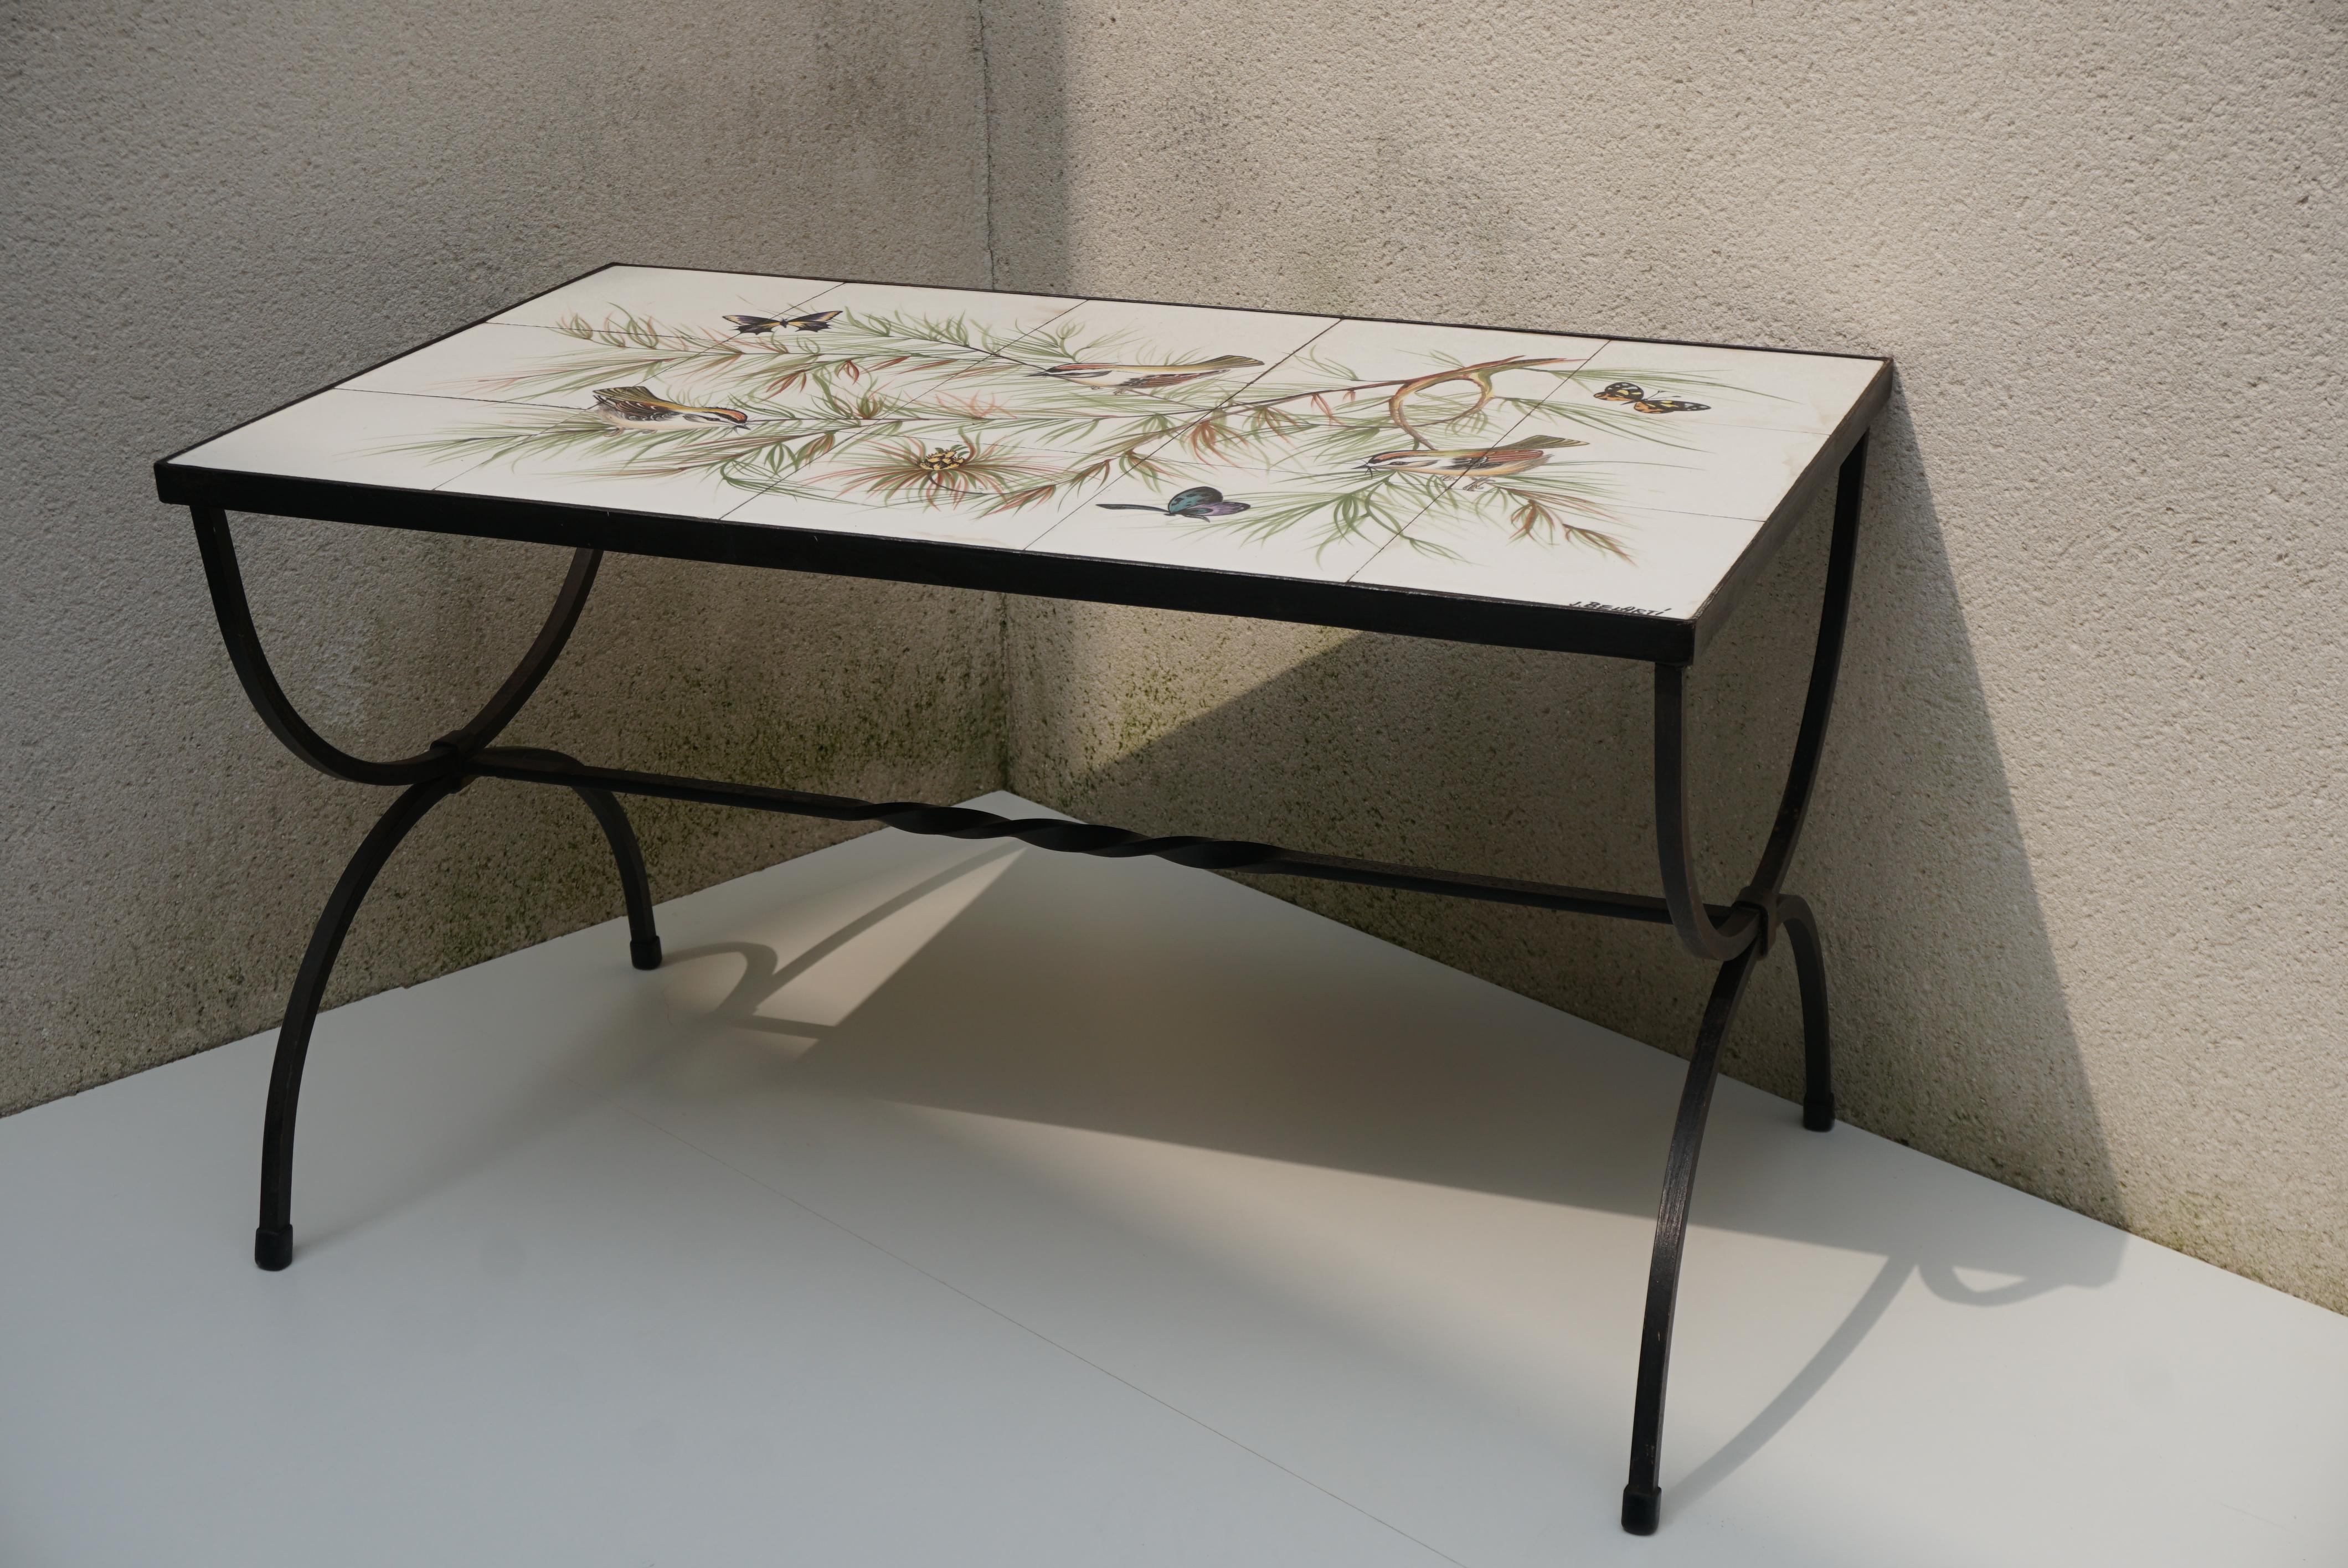 20th Century Belarti Ceramic Tile Side Coffee Table with Birds and Butterflies, 1960s For Sale